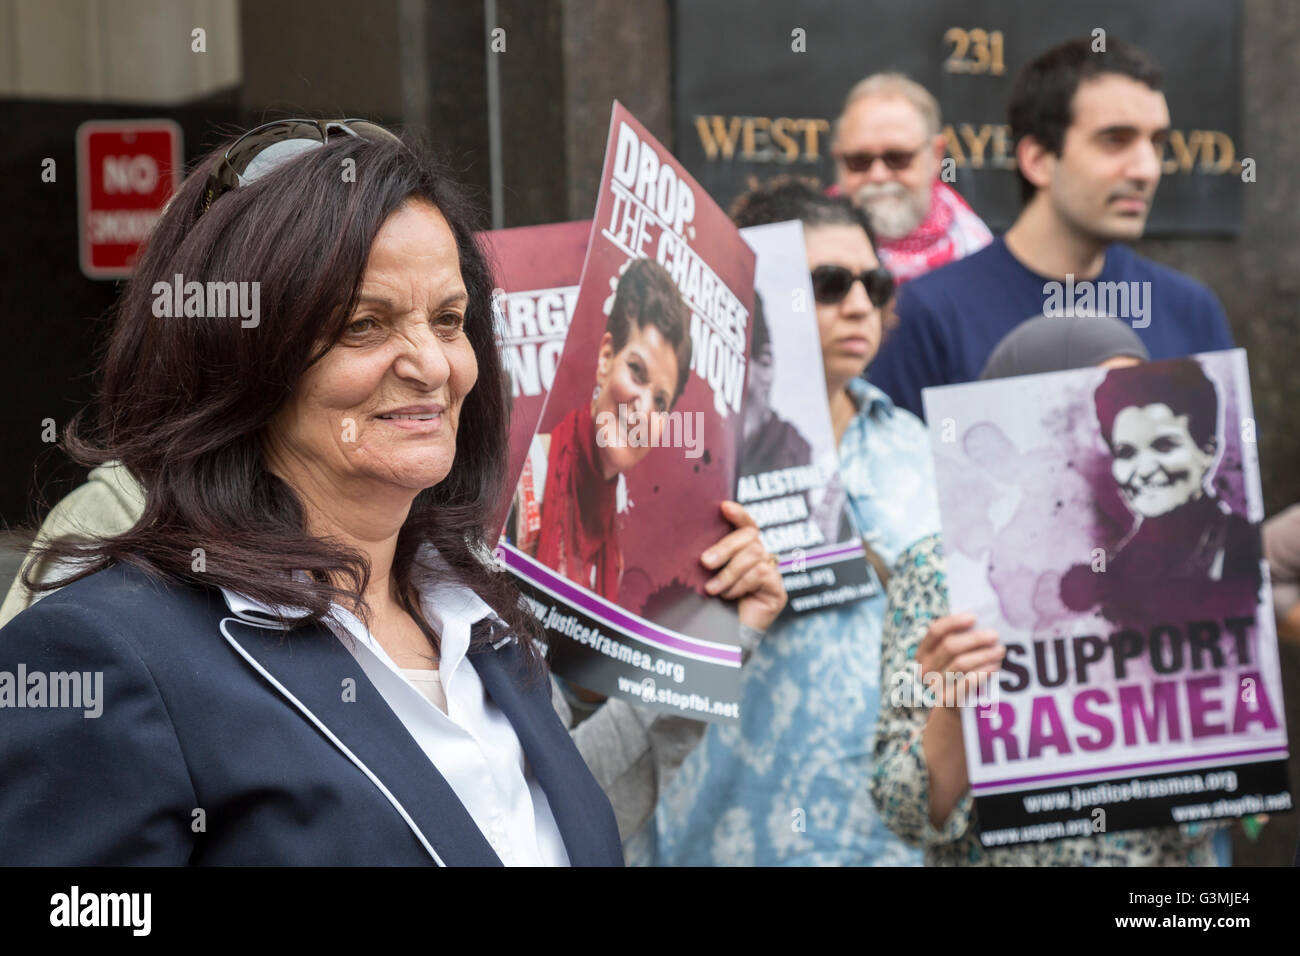 Detroit, Michigan, USA. 13th June, 2016. Supporters of Palestinian-American activist Rasmea Odeh (left) rallied outside a Federal Courthouse where a federal judge held a status conference on her request for a new trial. In 2015, Odeh was convicted of lying on her 2004 application for U.S. citizenship. But a federal appeals court ordered Judge Gershwin Drain to reconsider the case because he had improperly excluded testimony about Odeh's torture in an Israeli prison. Credit:  Jim West/Alamy Live News Stock Photo